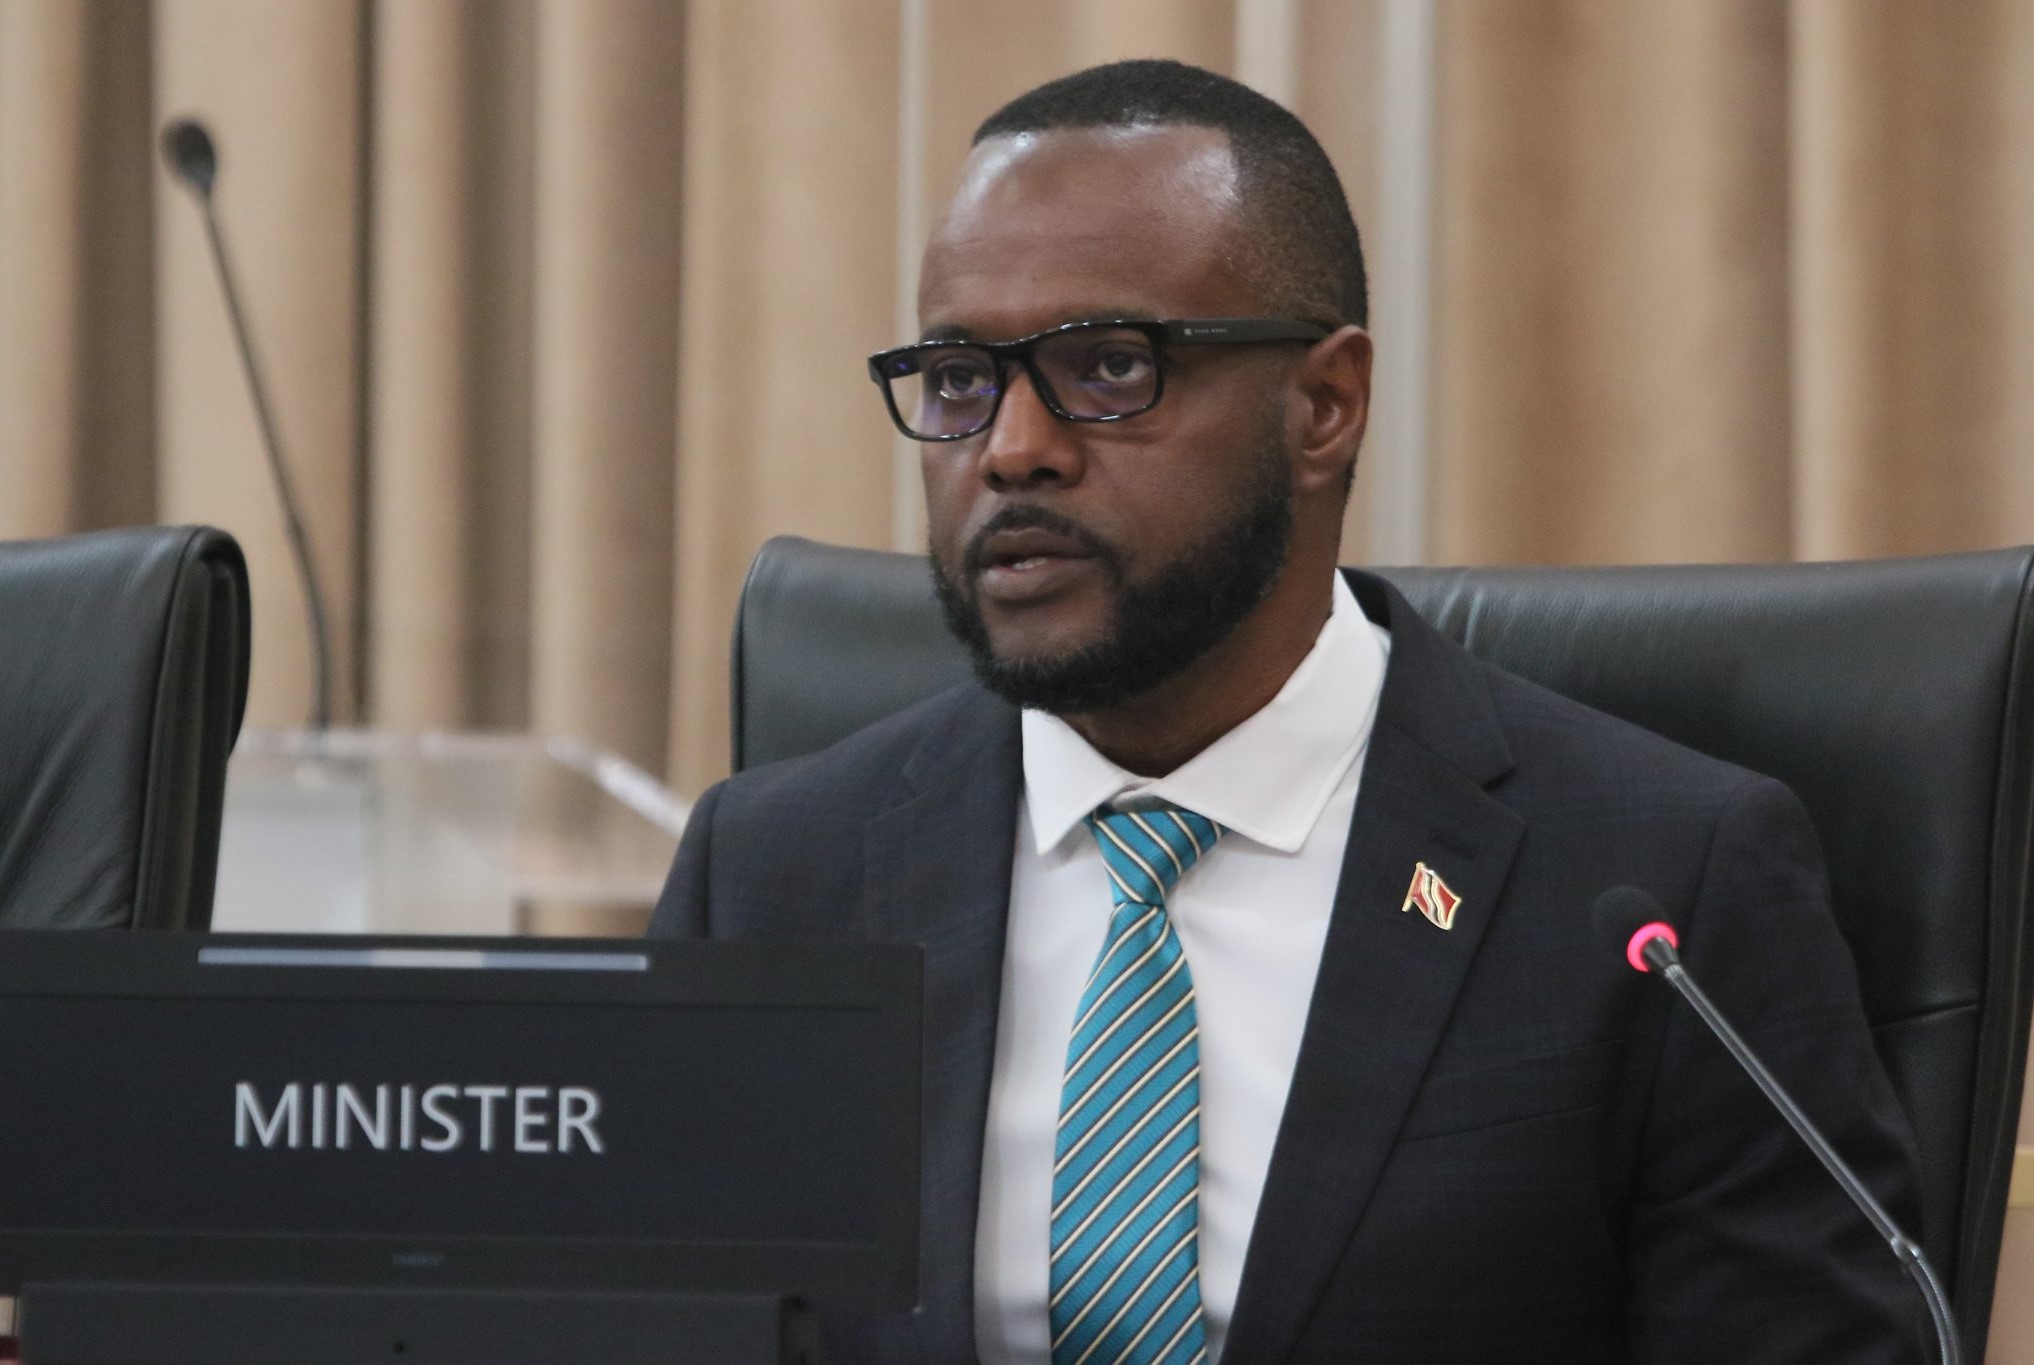 Public Utilities Minister says he doesn’t have the power to fire TSTT CEO